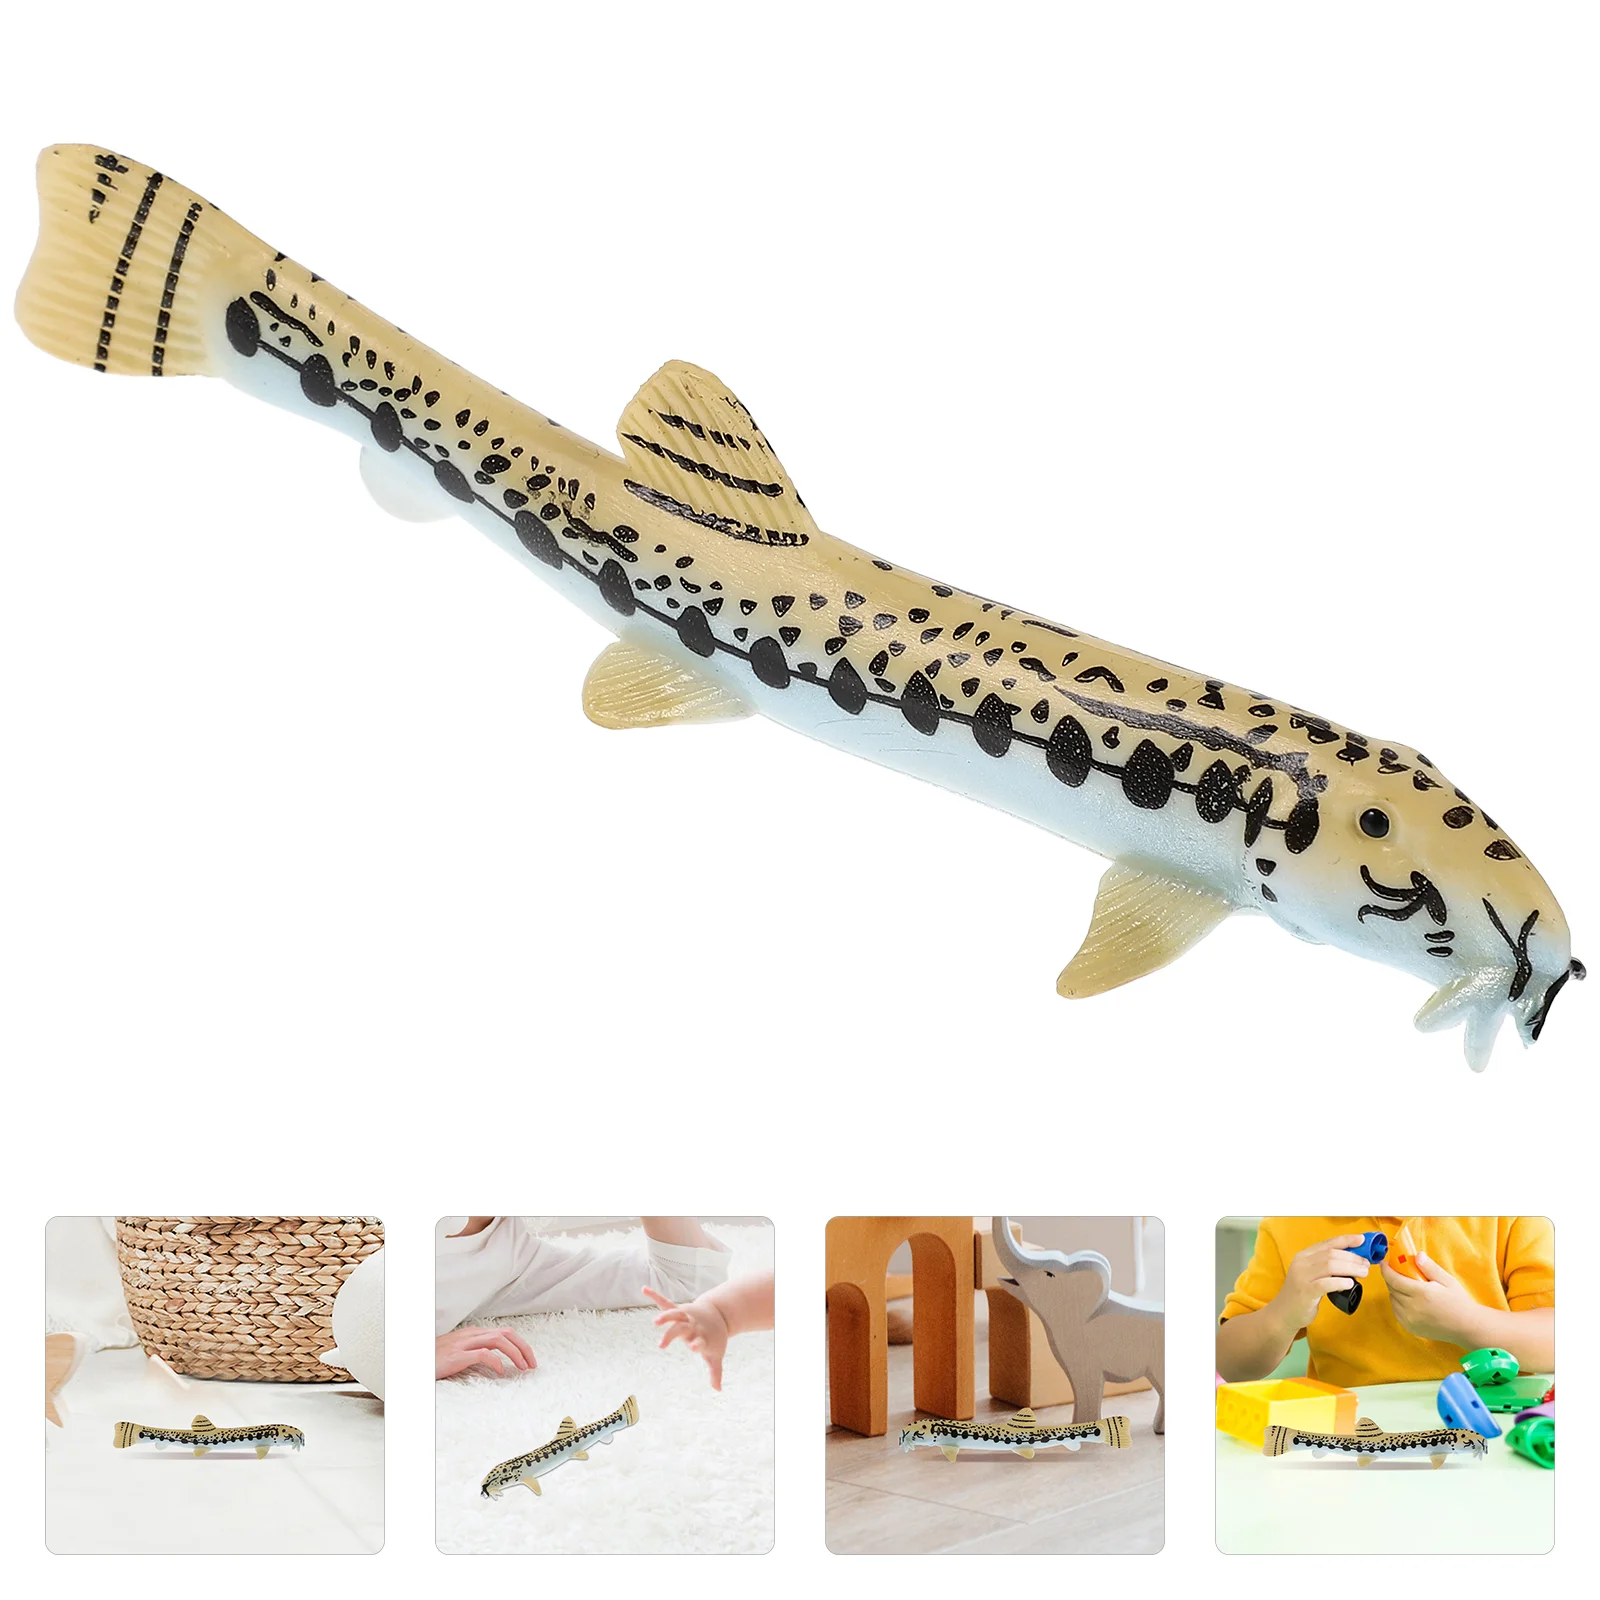 

Model Animal Loach Ocean Toys Toy Creature Simulated Figurine Marine Learning Teaching Kids Play Pretend Models Educational